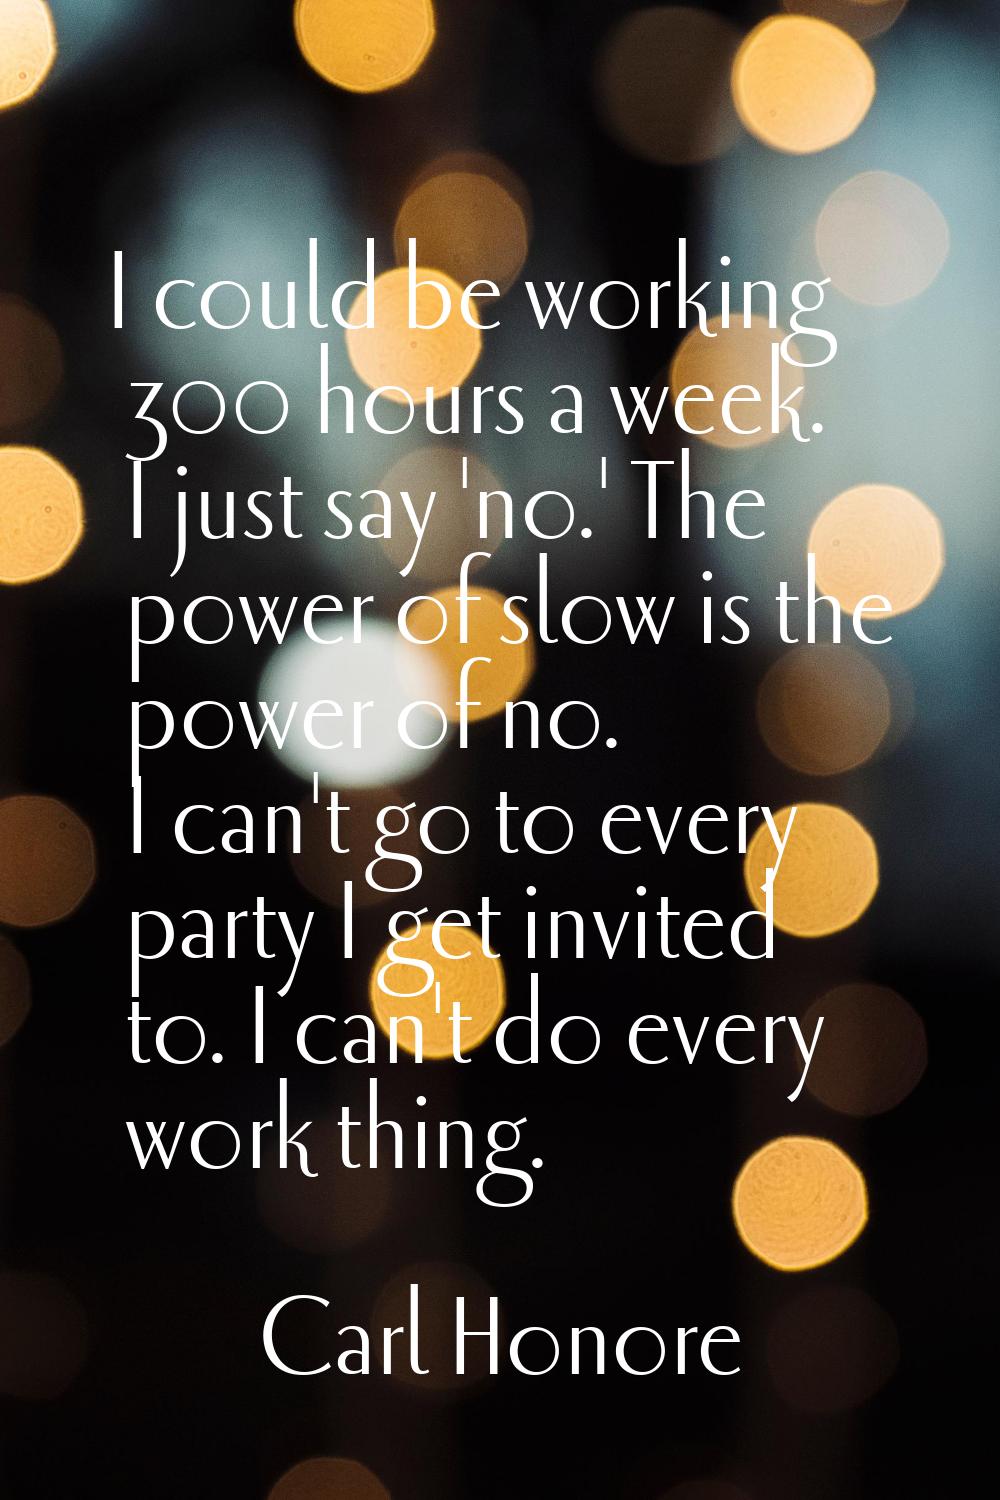 I could be working 300 hours a week. I just say 'no.' The power of slow is the power of no. I can't